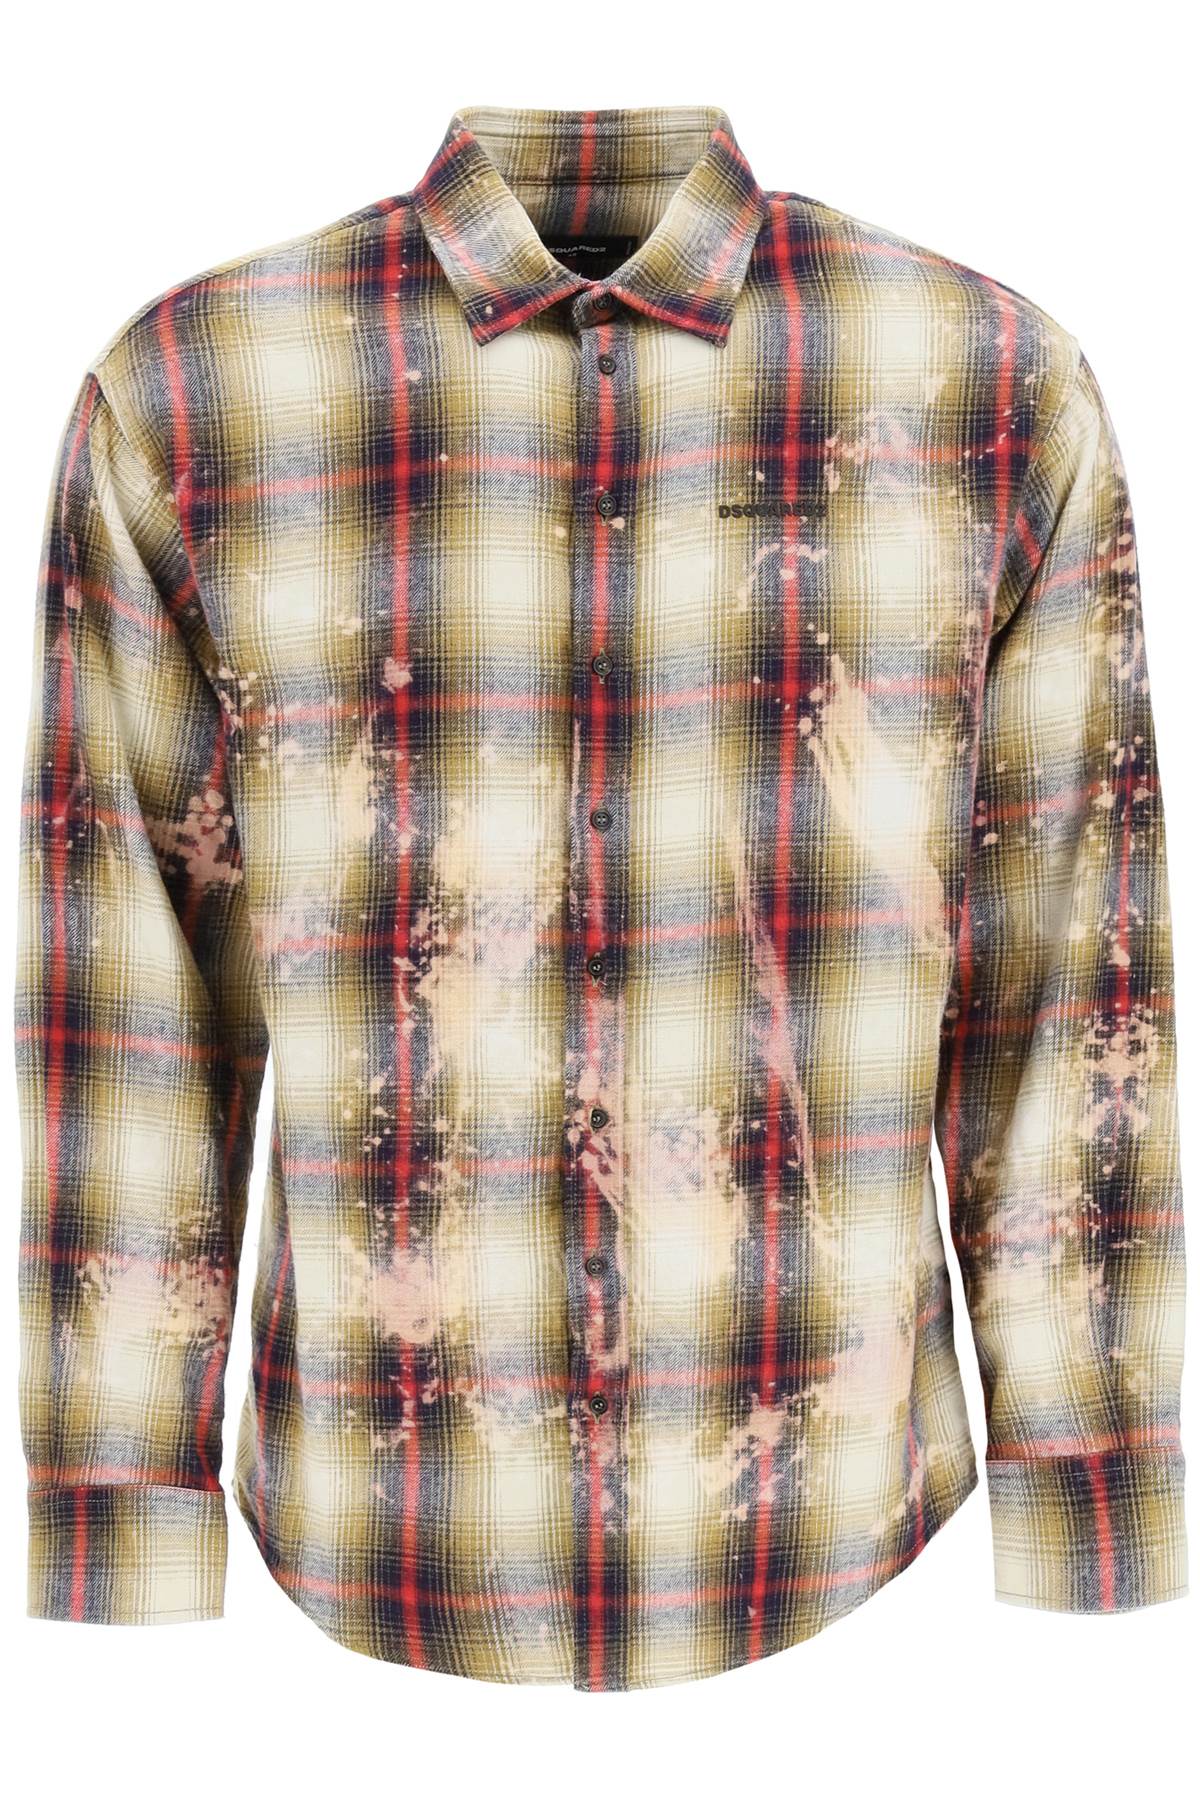 DSQUARED2 DROP SHOULDER SHIRT IN BLEACHED CHECKED FLANNEL